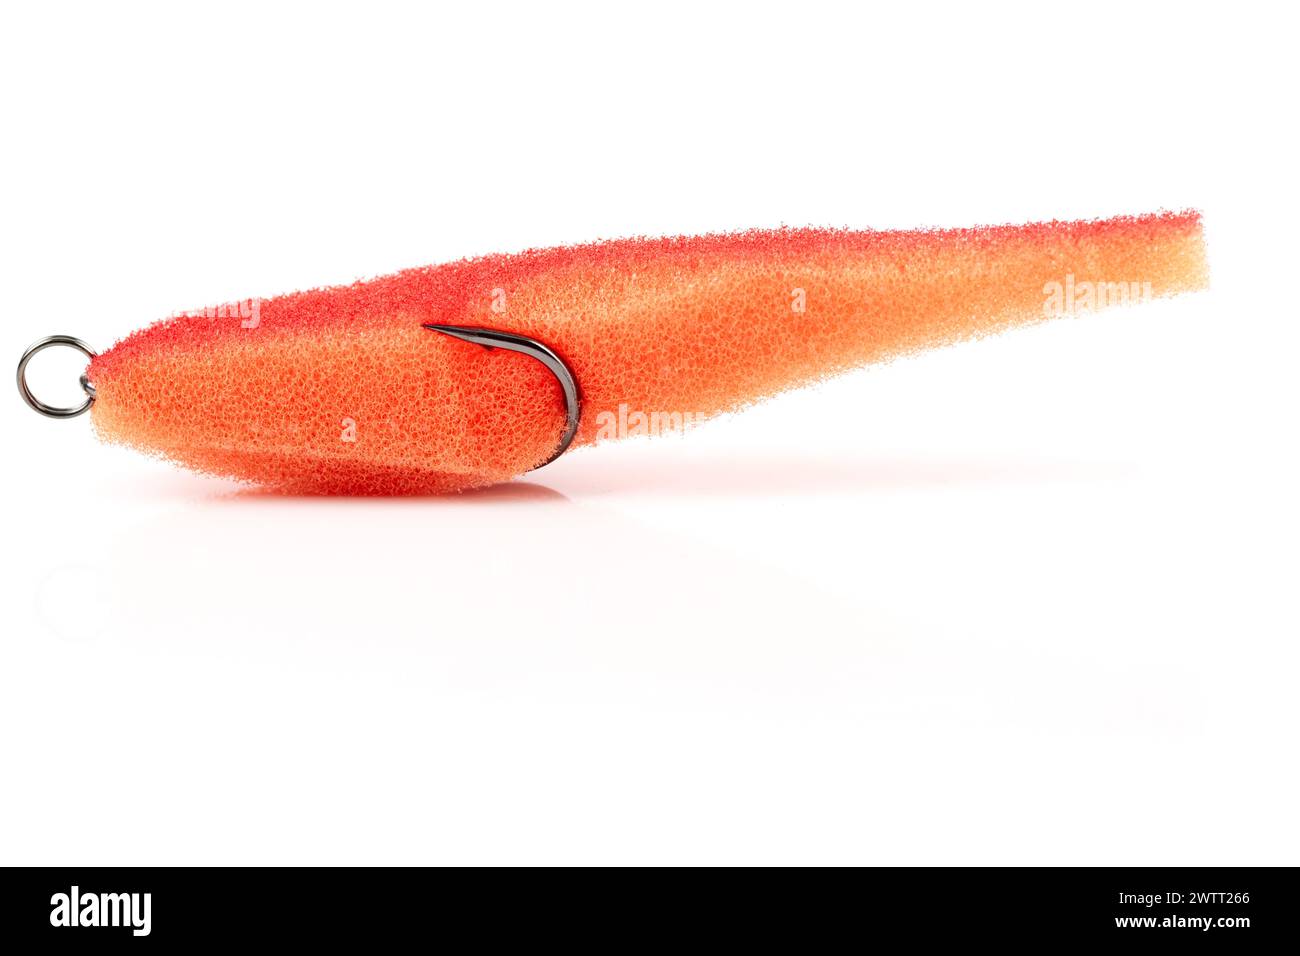 Homemade artificial fishing lure made of polyurethane foam, isolated on white background Stock Photo